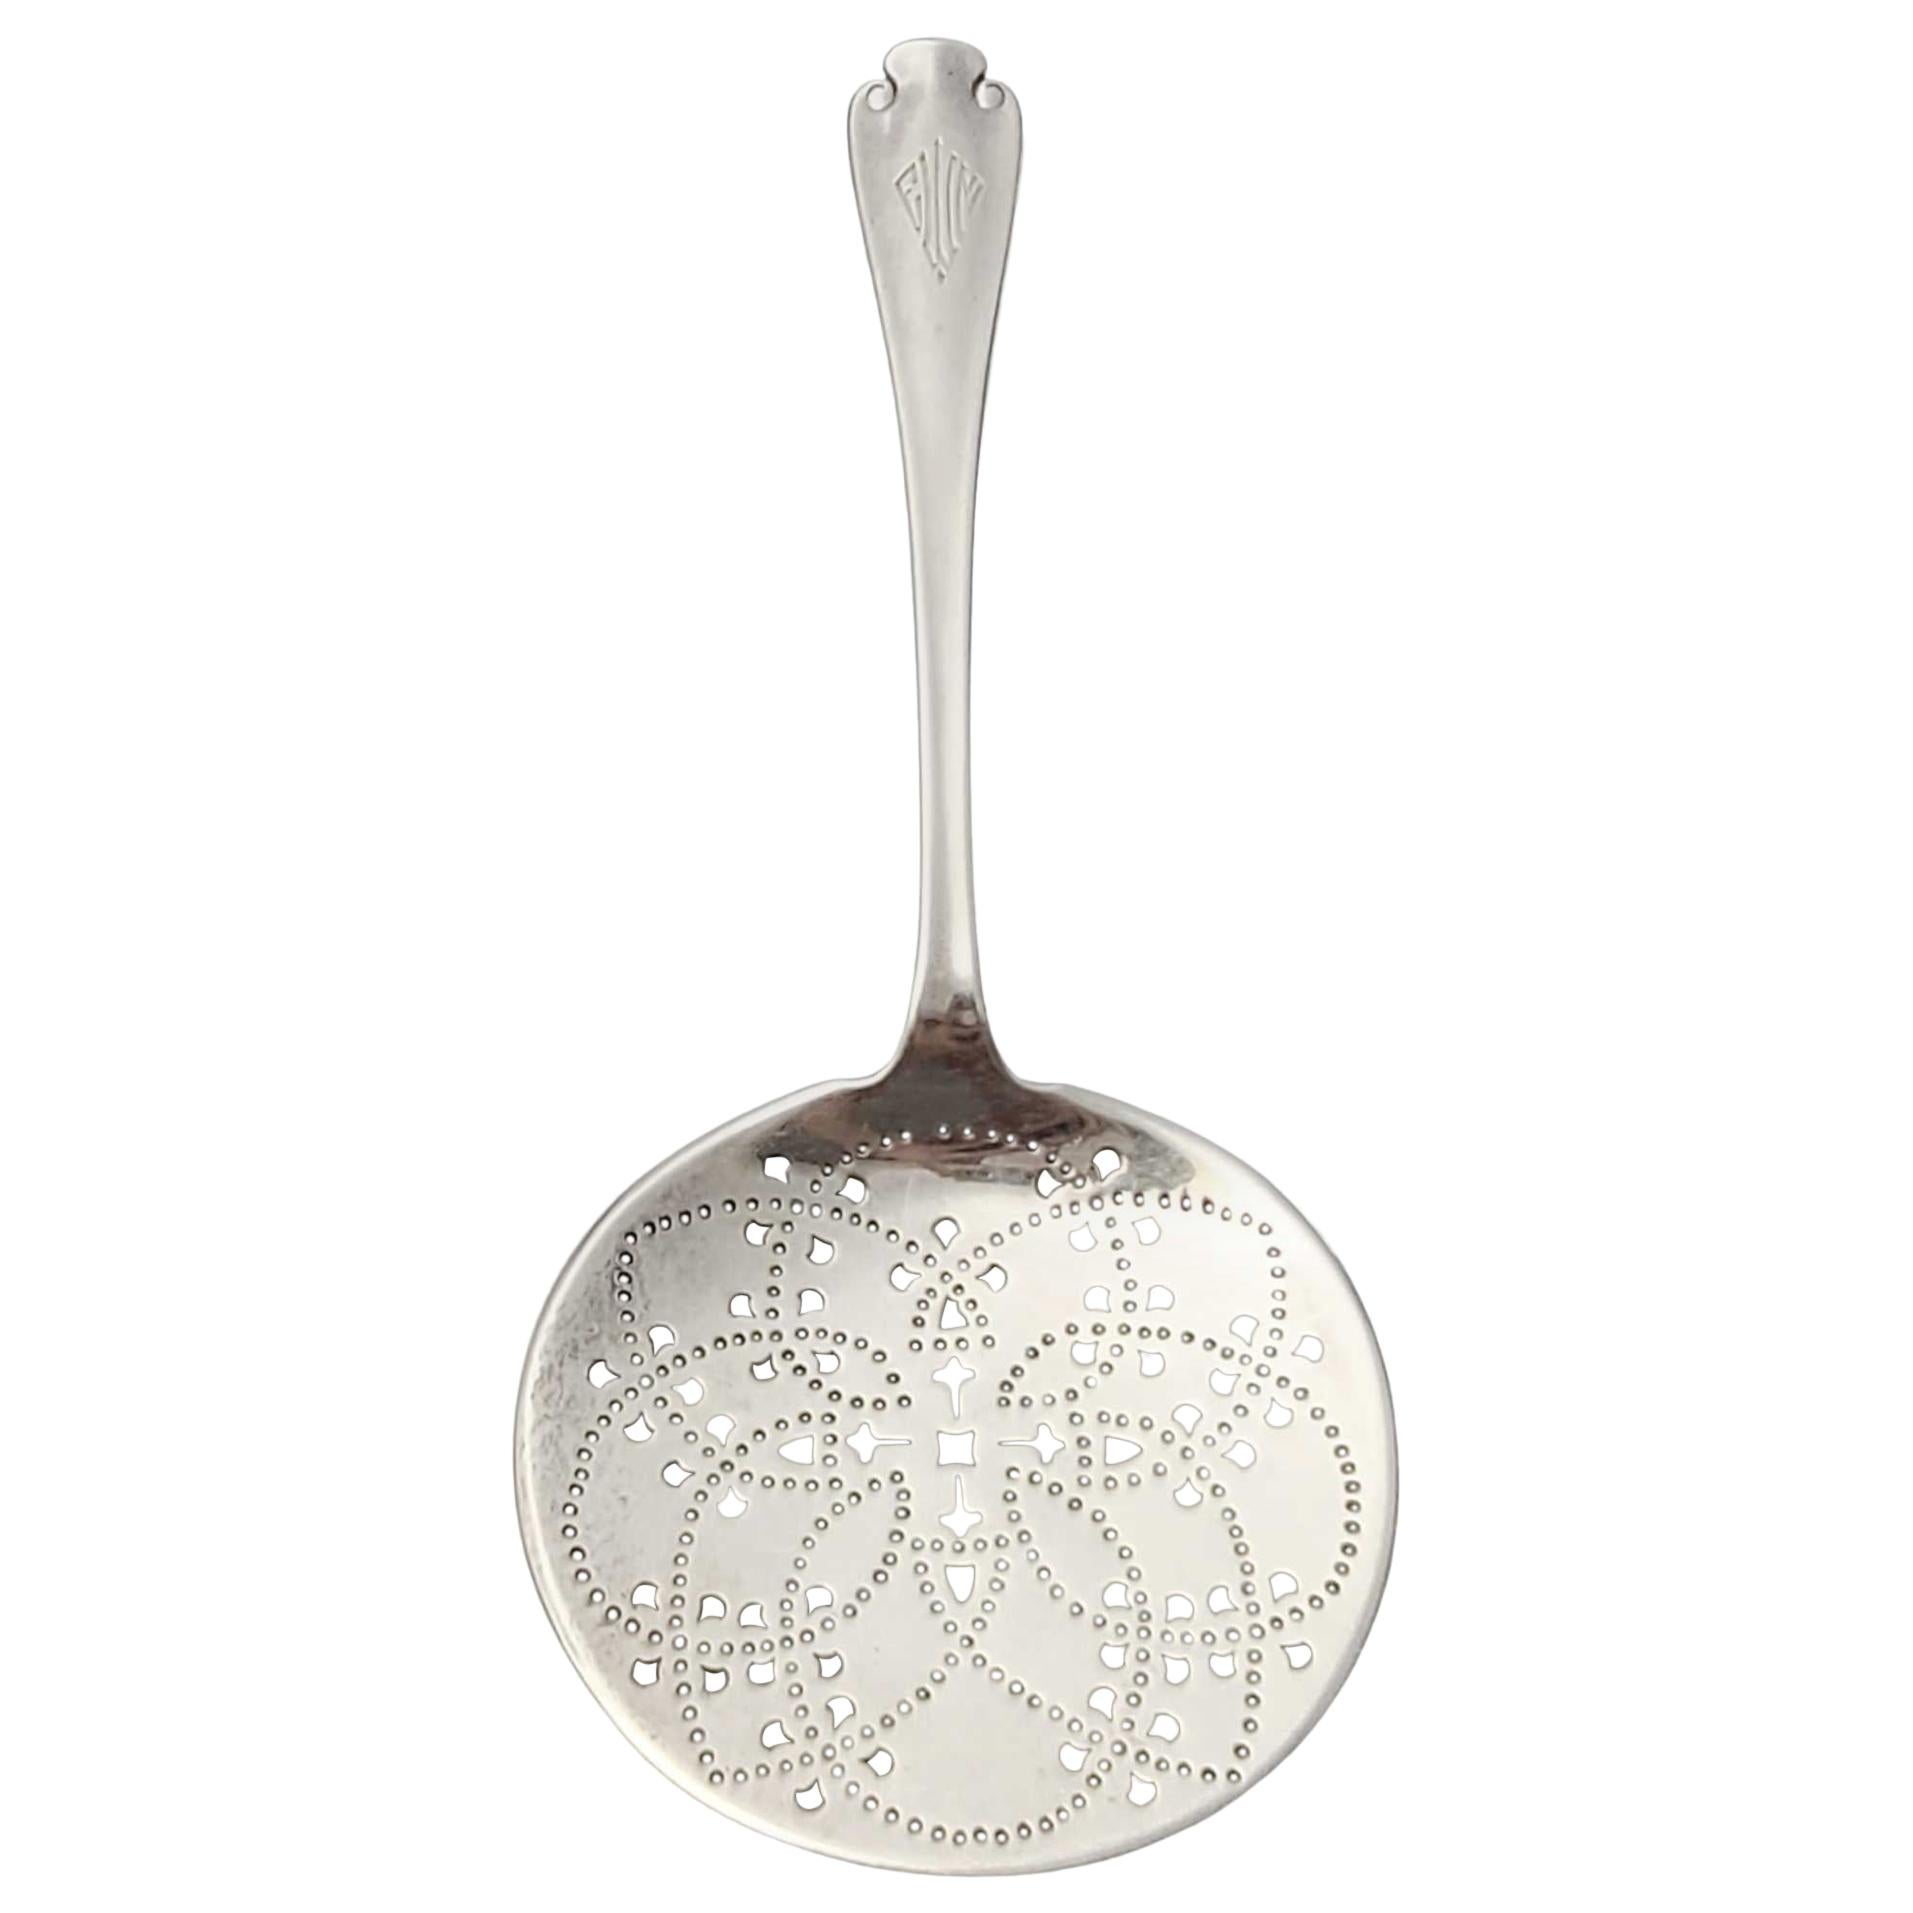 Tiffany & Co Flemish Sterling Silver Pierced Tomato Server with Monogram